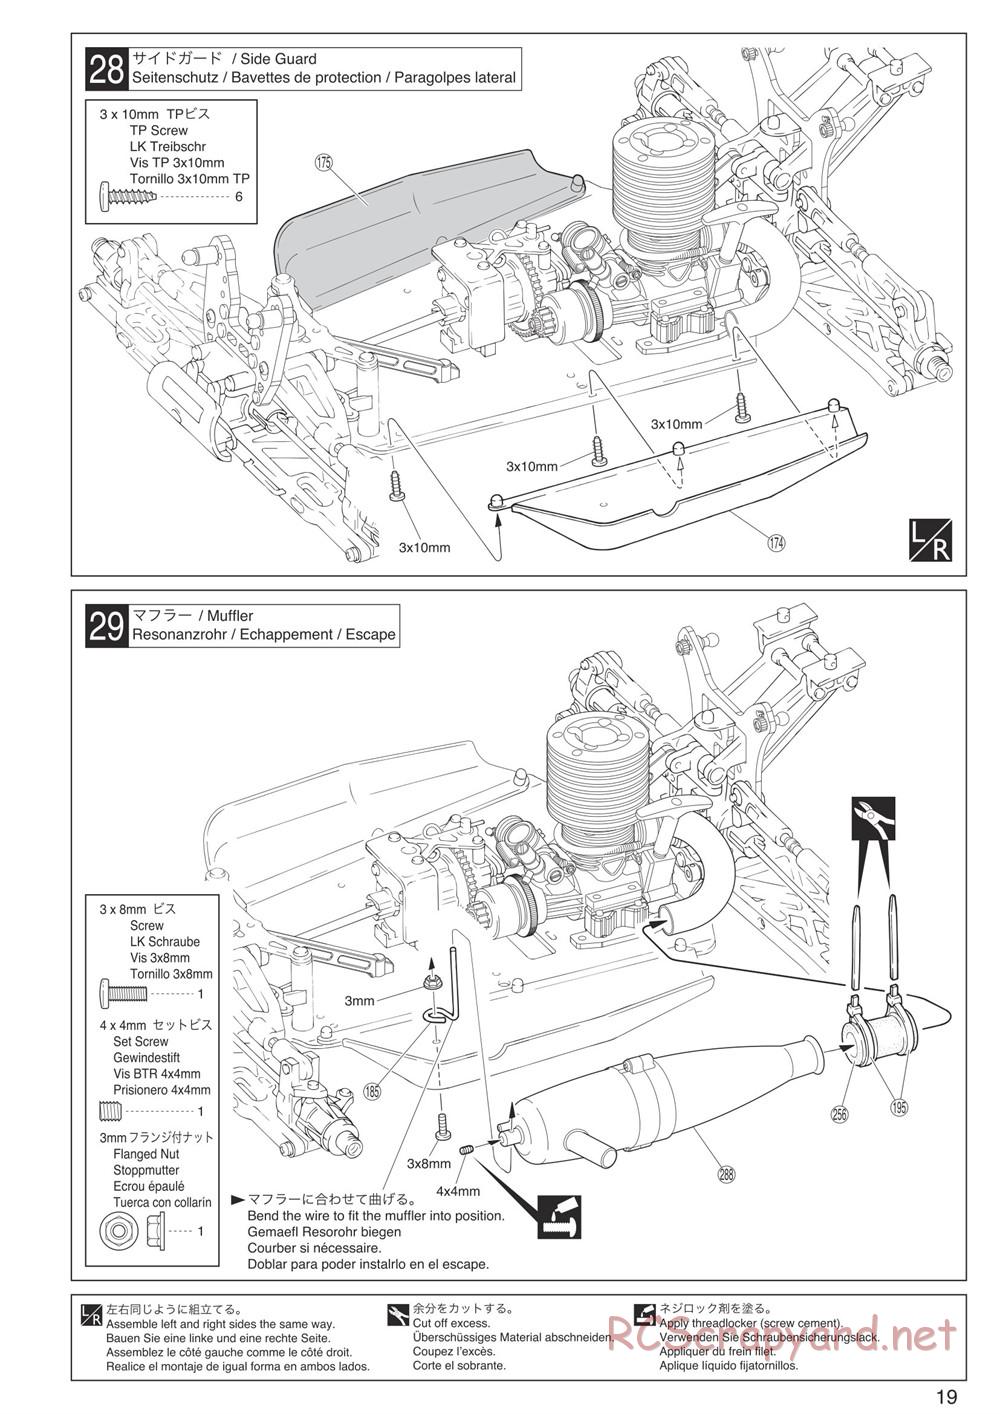 Kyosho - Inferno Neo 3.0 - Manual - Page 19